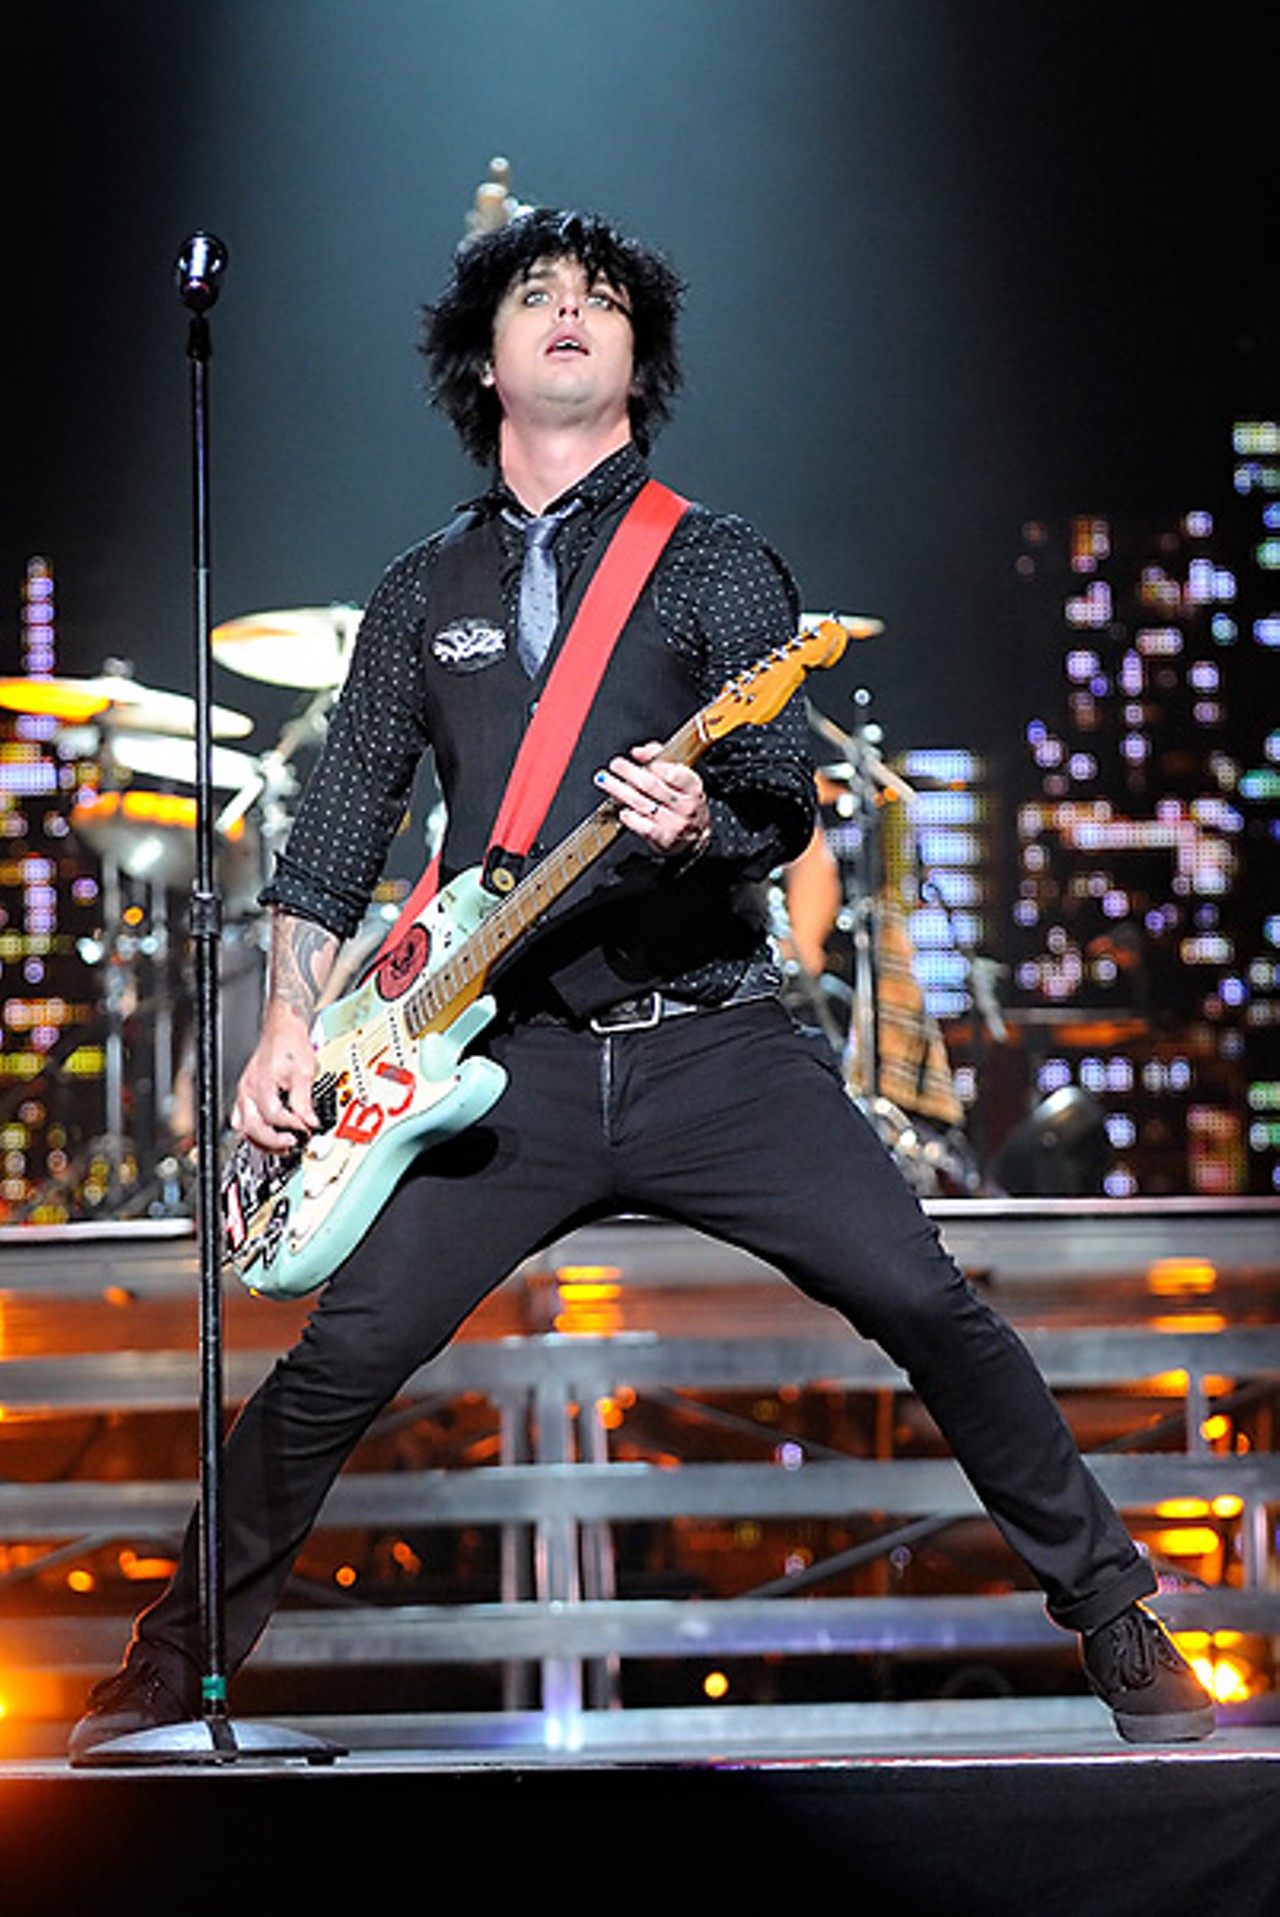 At age 37, Green Day front-man Billy Joe Armstrong has perfected the stage pose. See more Green Day photos.